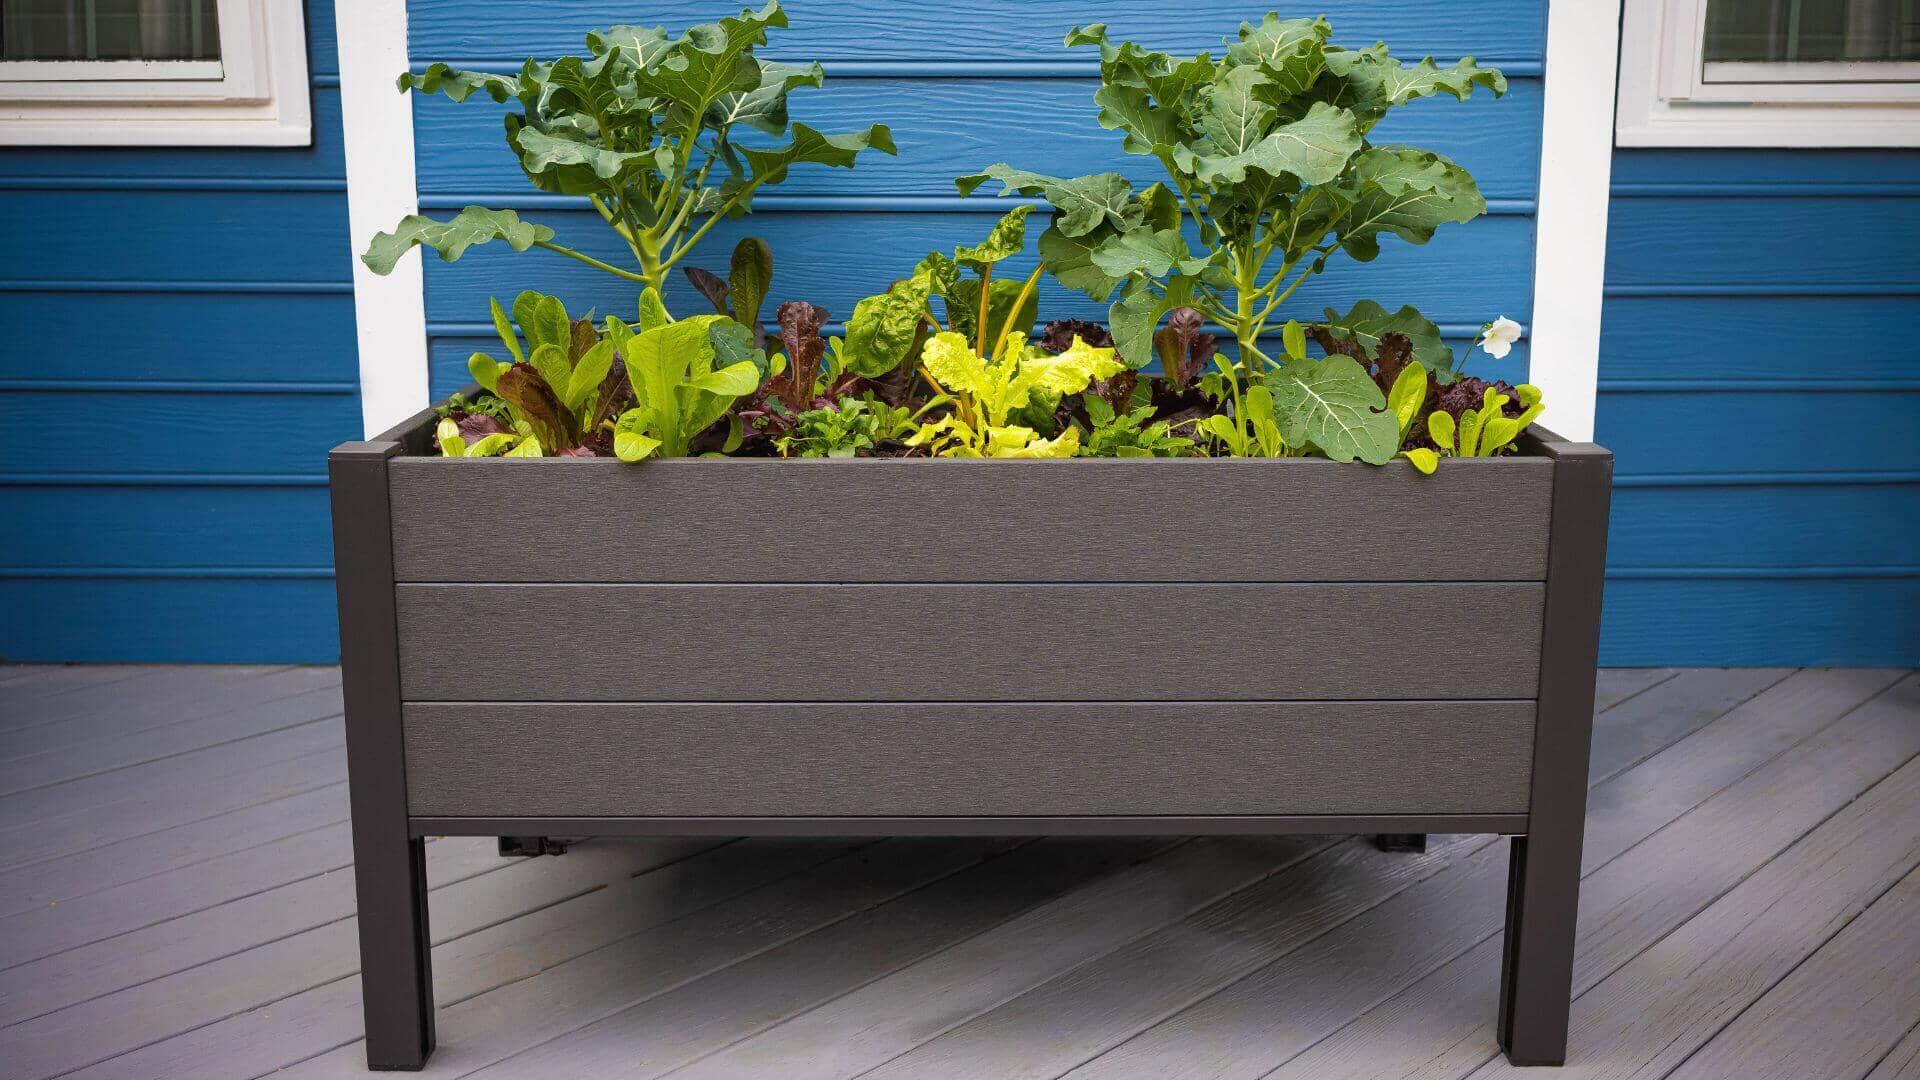 The Skyline Planter (24” x 48” x 25”) Elevated Garden Bed Raised Garden Beds Frame It All 